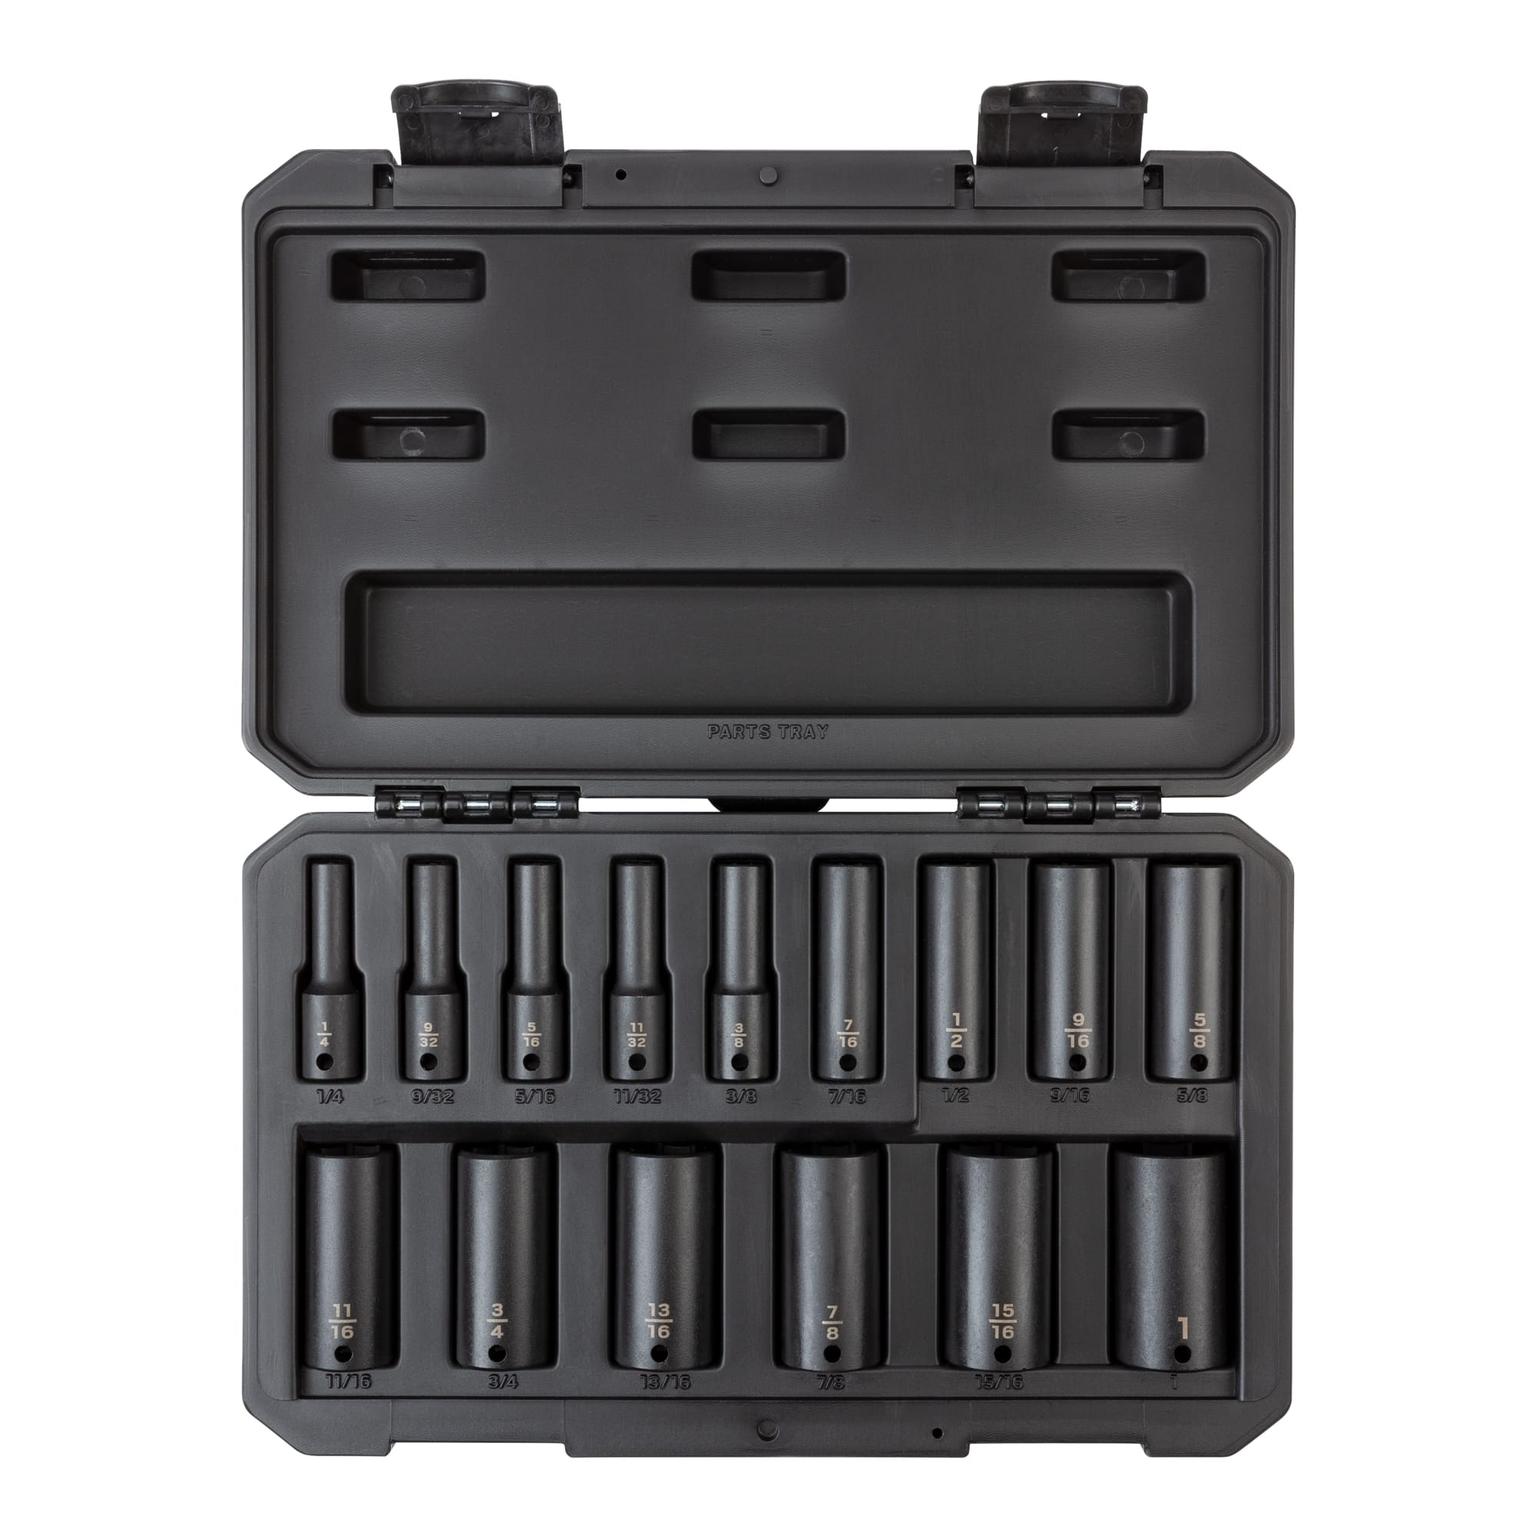 TEKTON SID91301-D 3/8 Inch Drive Deep 6-Point Impact Socket Set with Case, 15-Piece (1/4-1 in.)